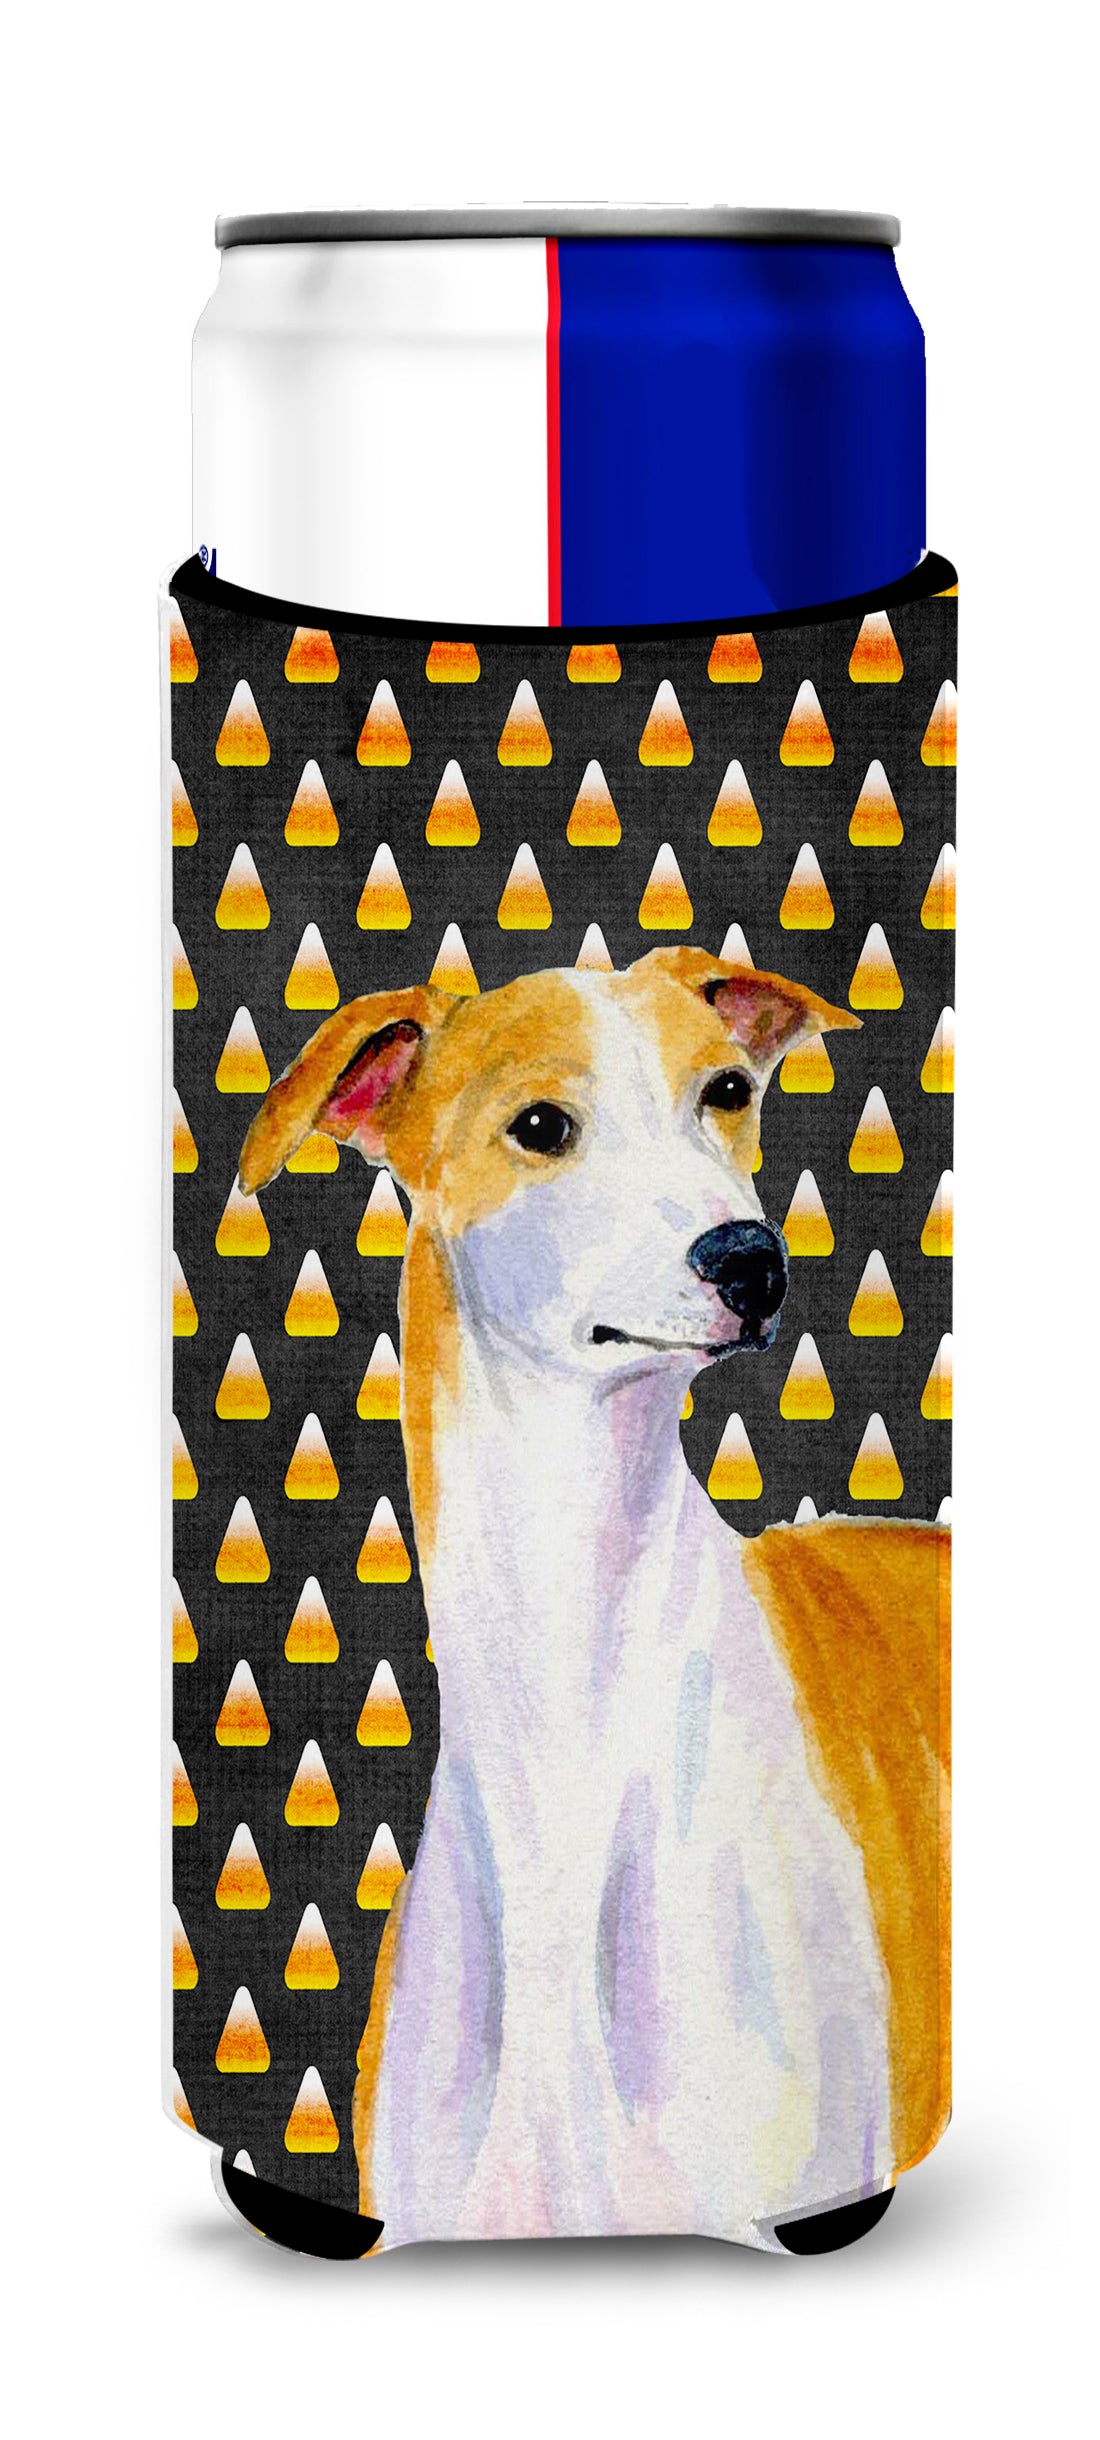 Whippet Candy Corn Halloween Portrait Ultra Beverage Insulators for slim cans LH9069MUK.